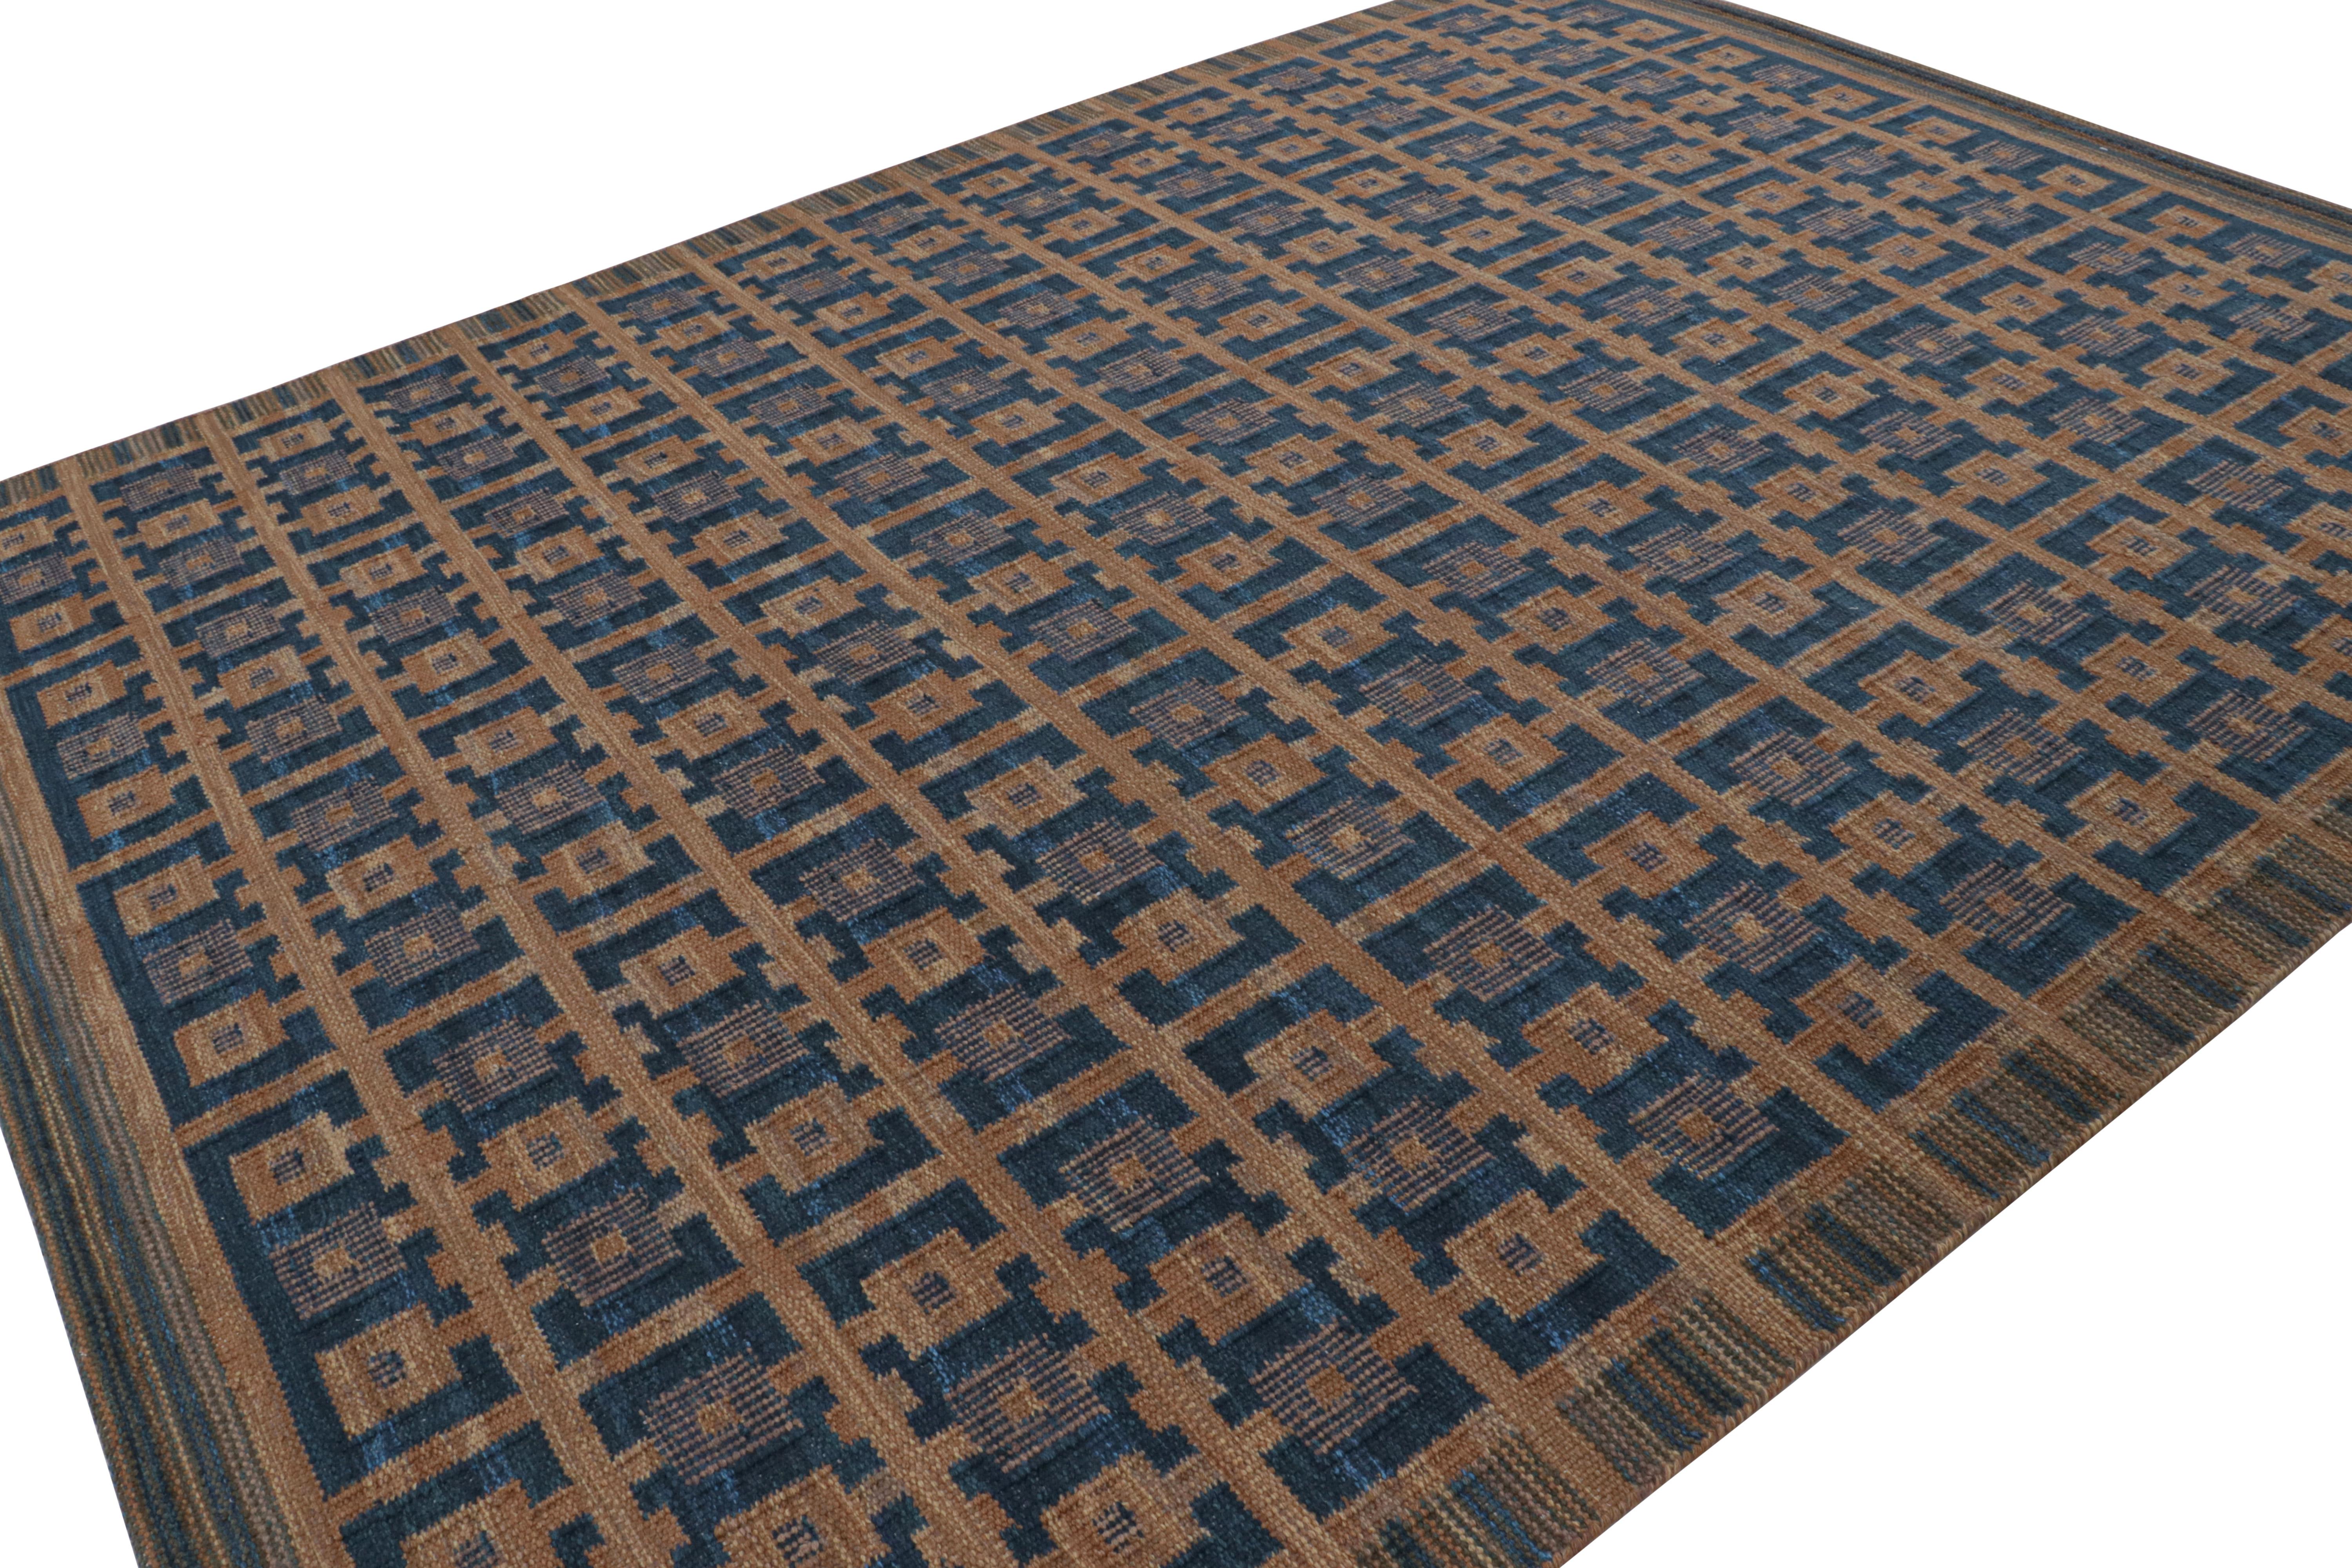 Indian Rug & Kilim’s Scandinavian Style Rug with Navy Blue and Brown Geometric Patterns For Sale